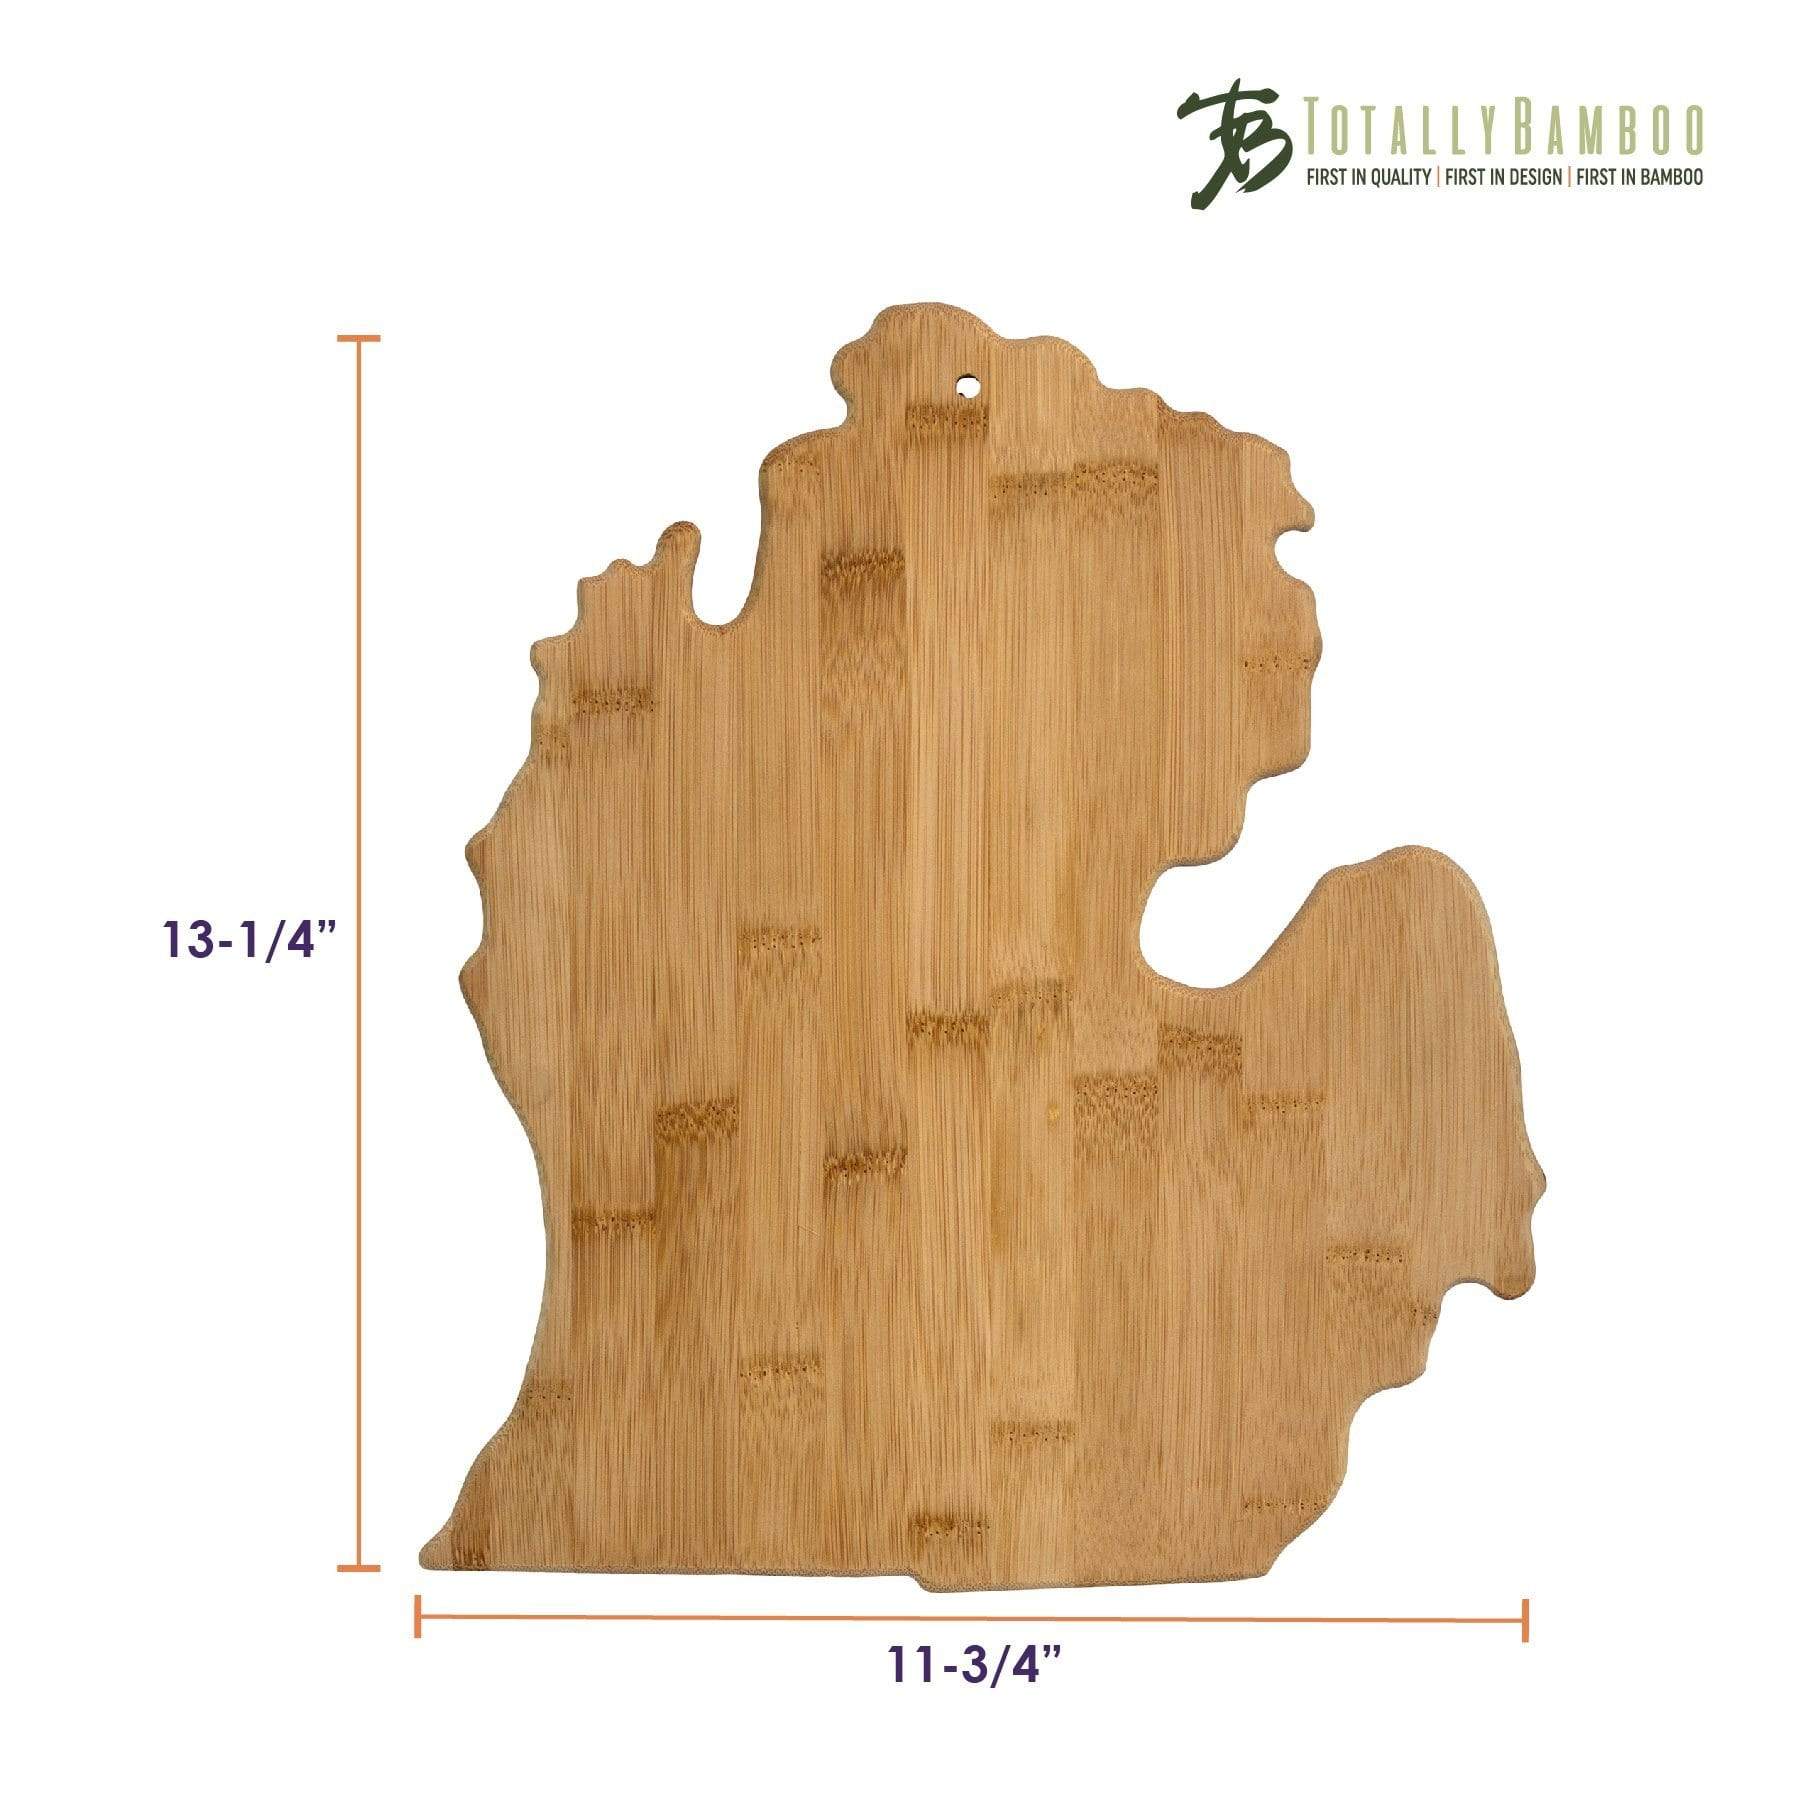 https://totallybamboo.com/cdn/shop/products/michigan-state-shaped-bamboo-serving-and-cutting-board-totally-bamboo-701845.jpg?v=1627853228